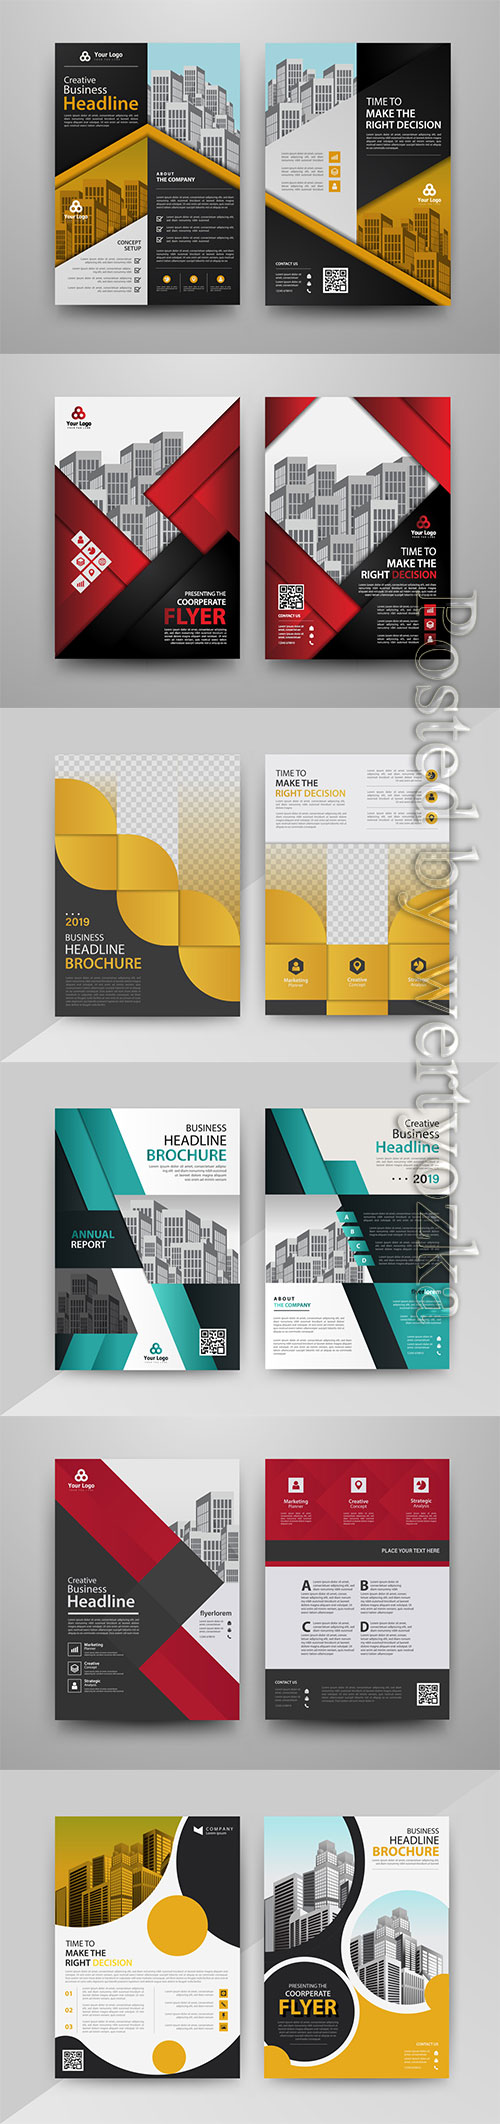 Business vector flyer template design with abstract